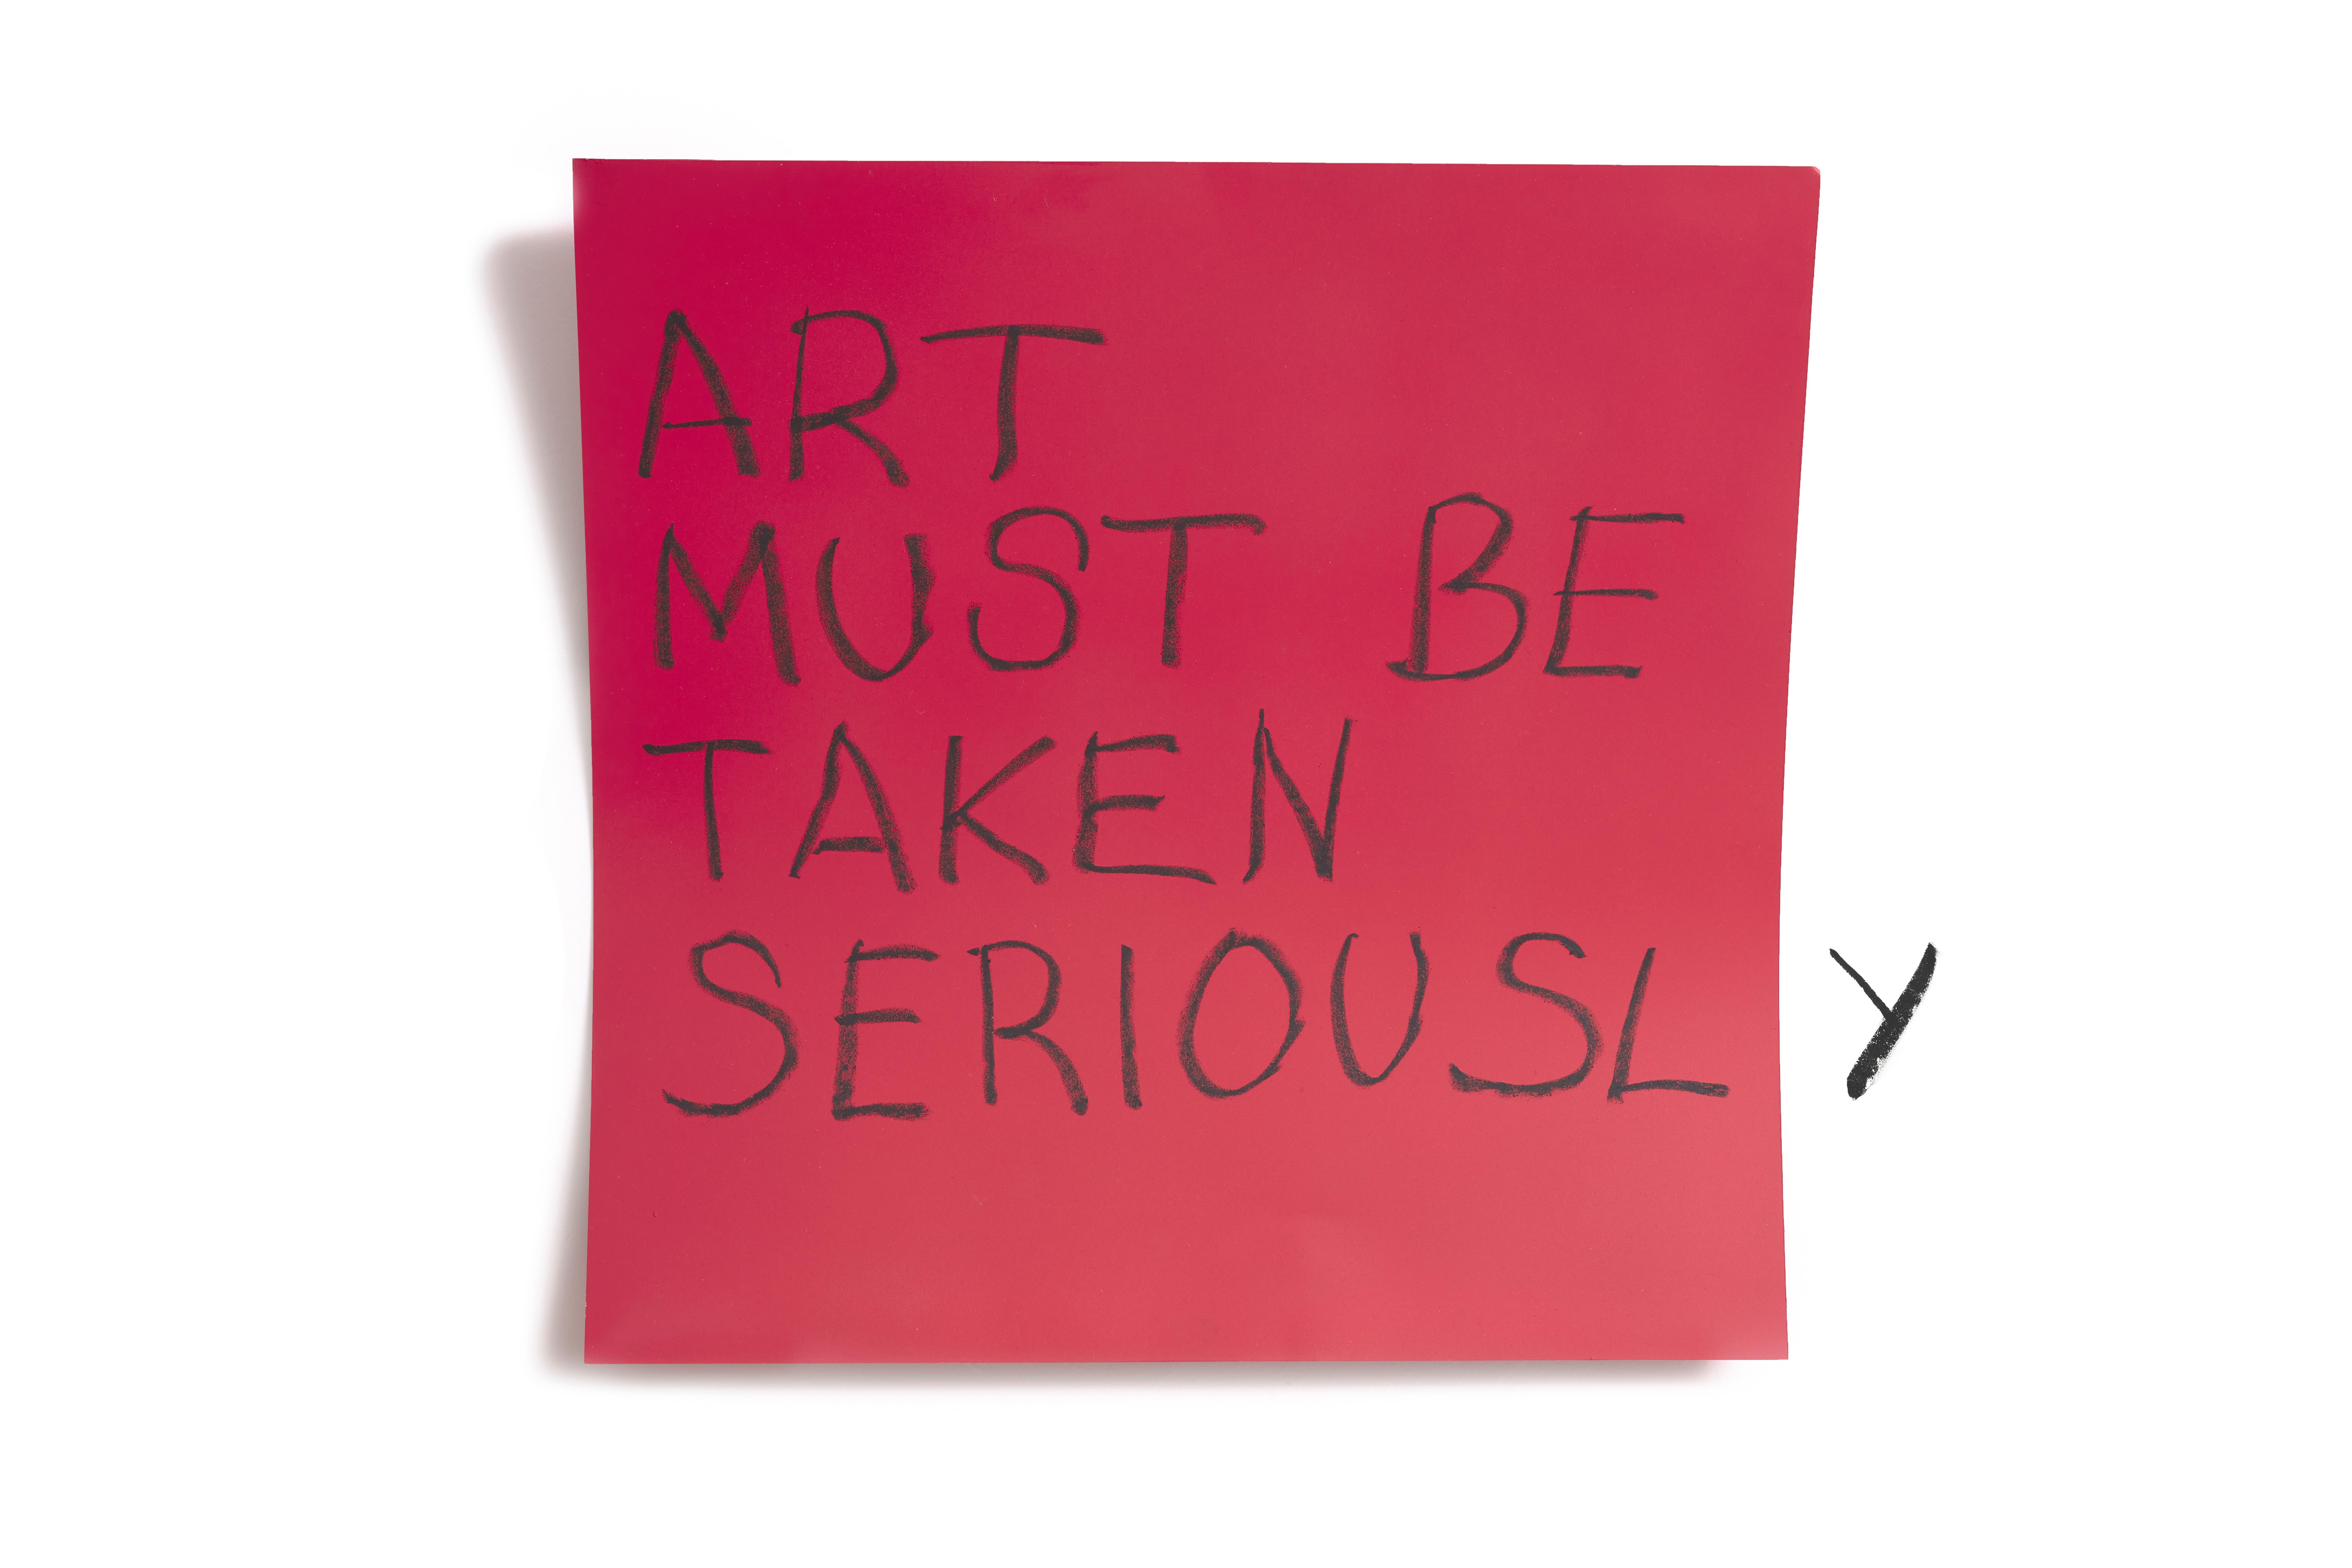 Daniele Sigalot  Abstract Sculpture - Daniele Sigalot, Art must be taken seriousl y, words, post-it, red, text